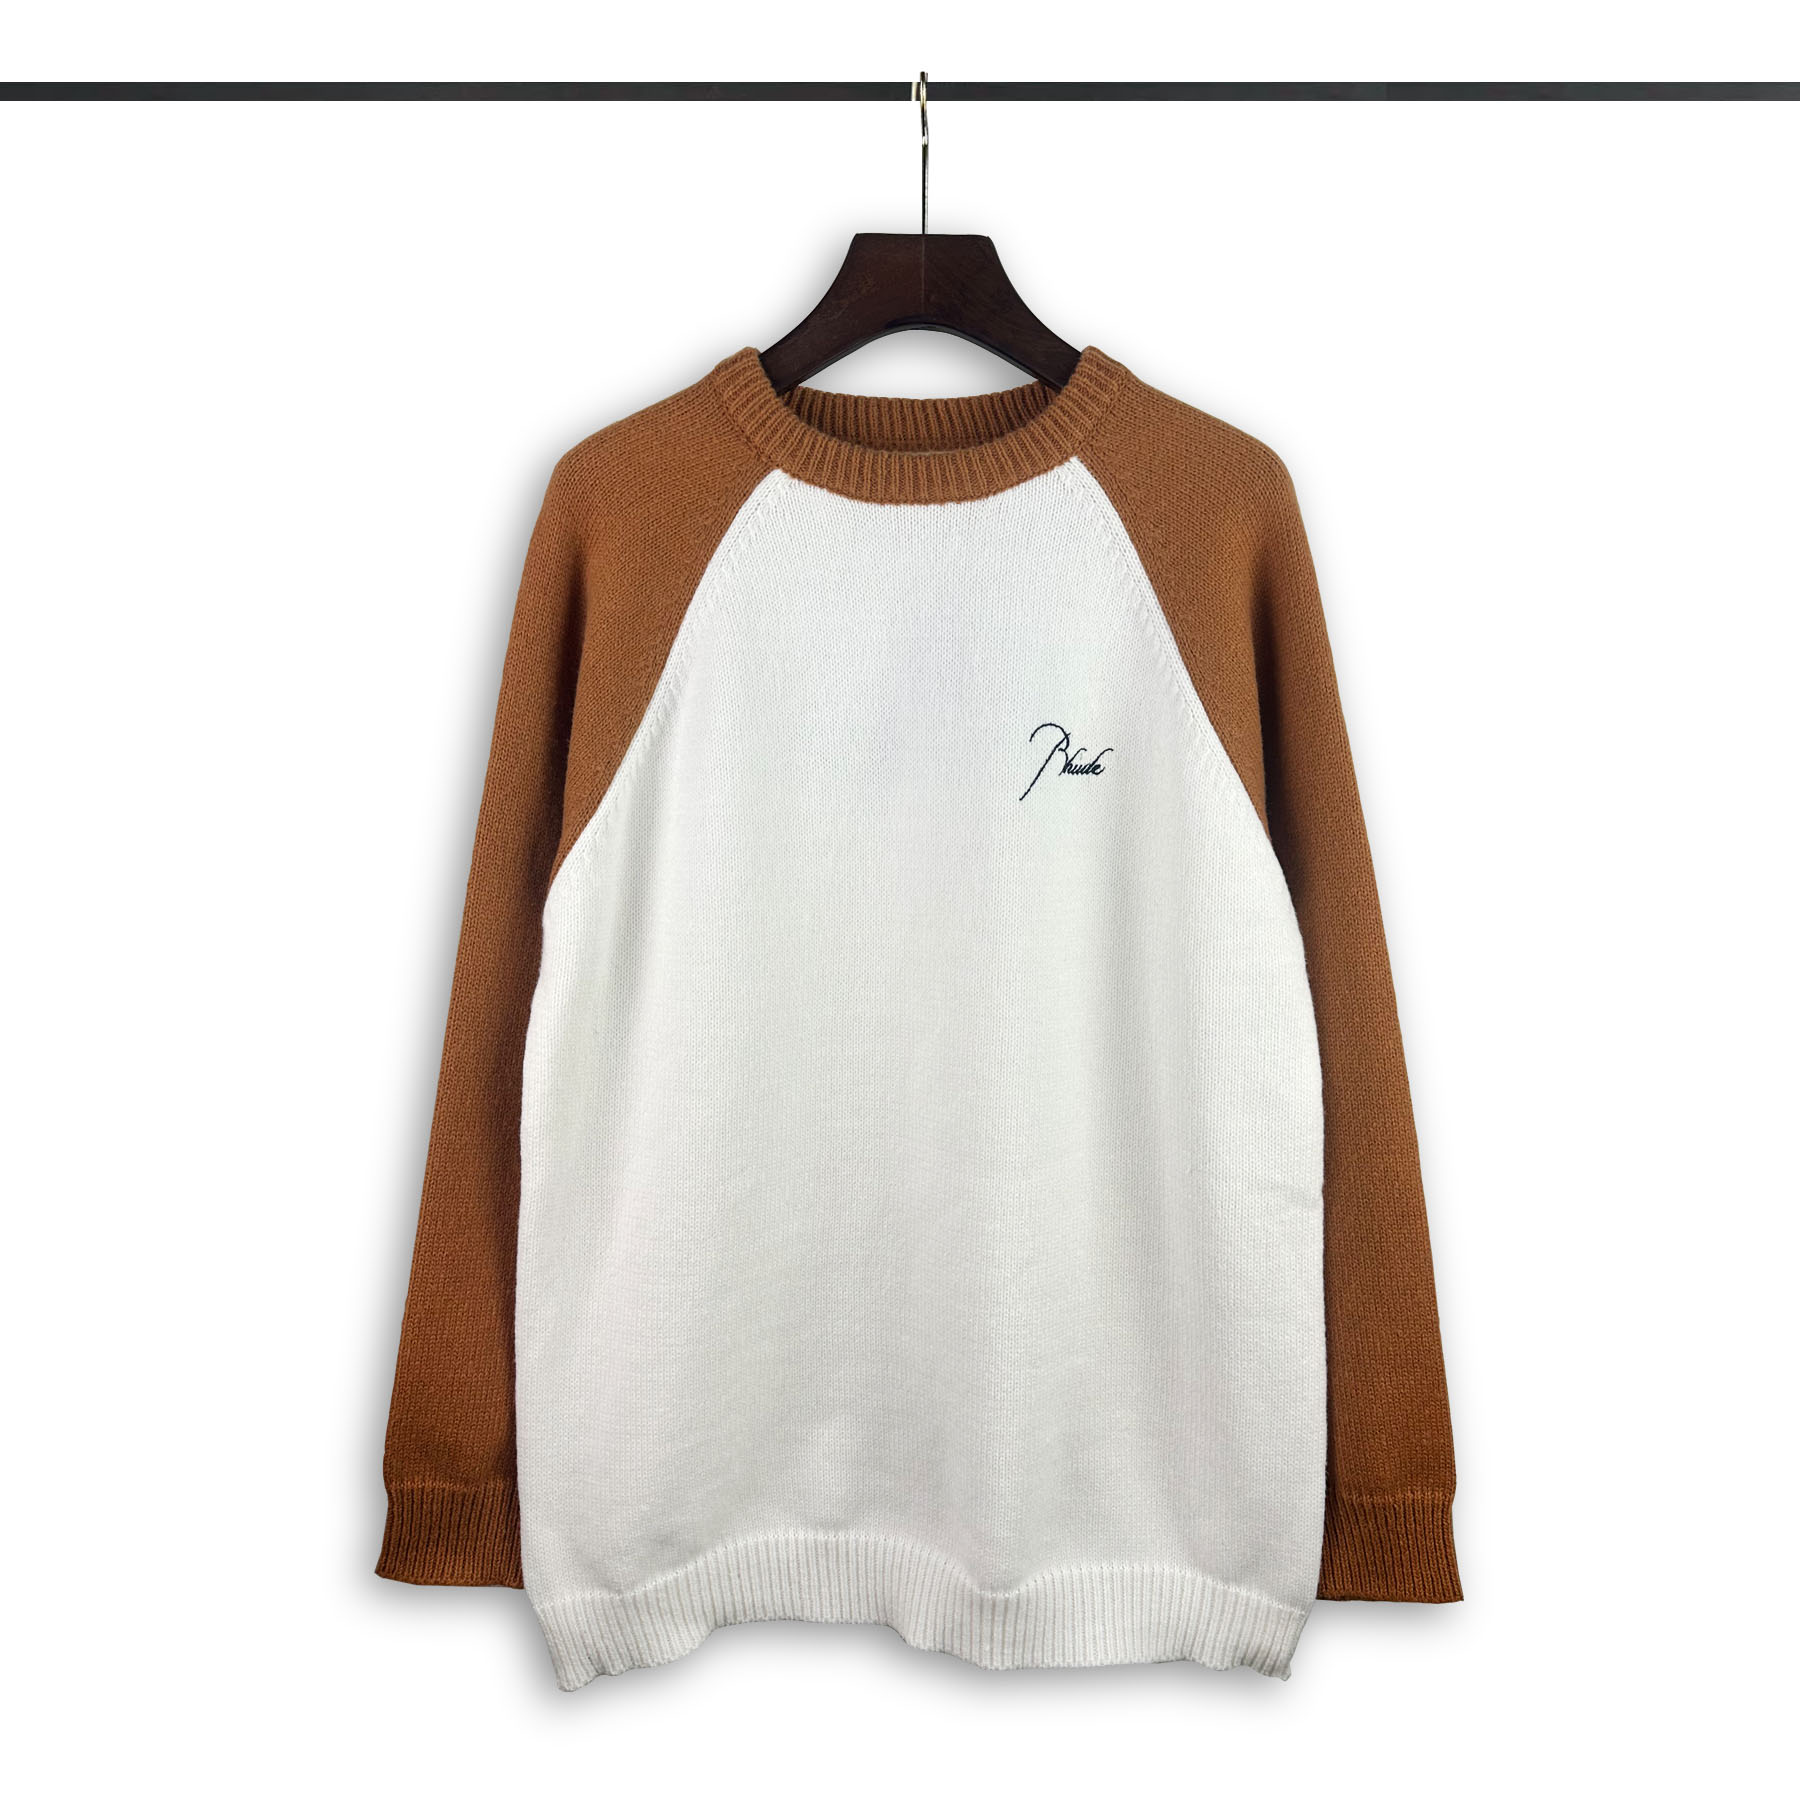 Rhude Clothing Sweatshirts Blue Brown White Embroidery